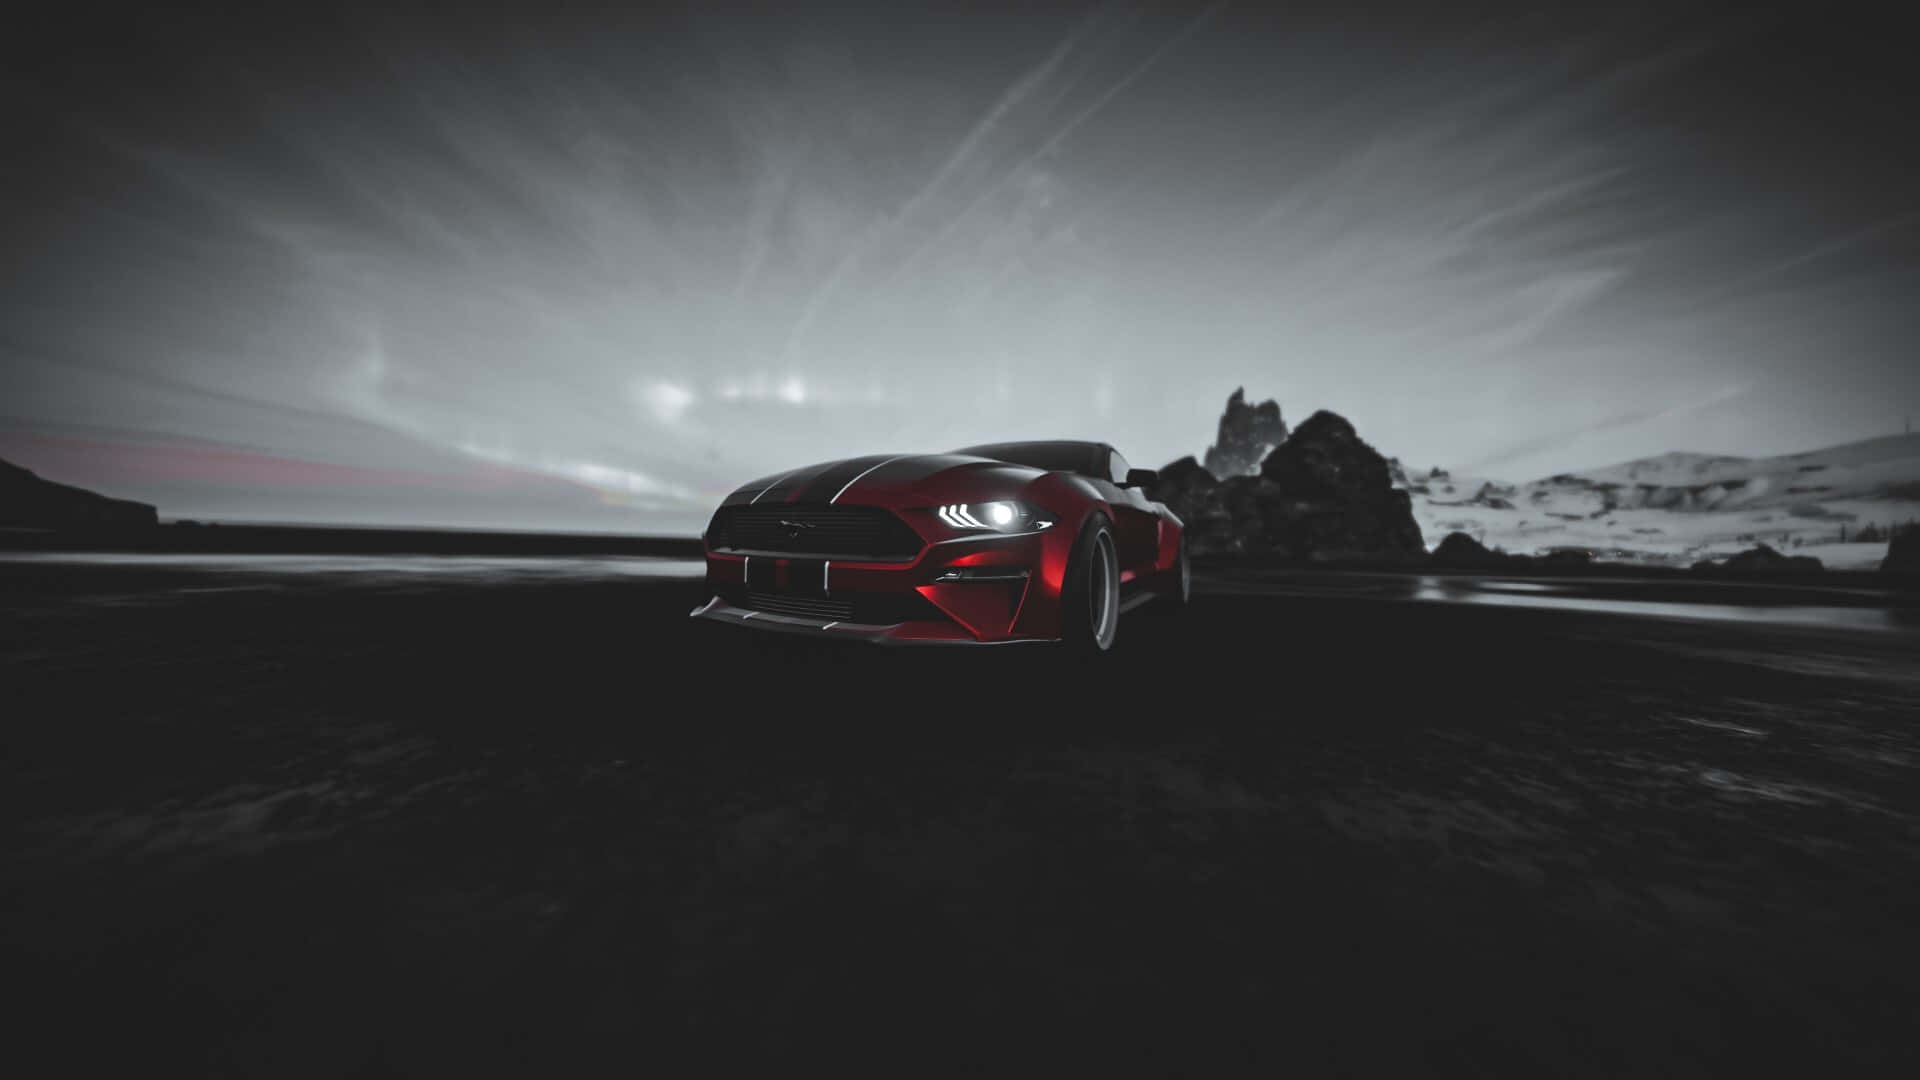 A Red And Black Car In The Desert